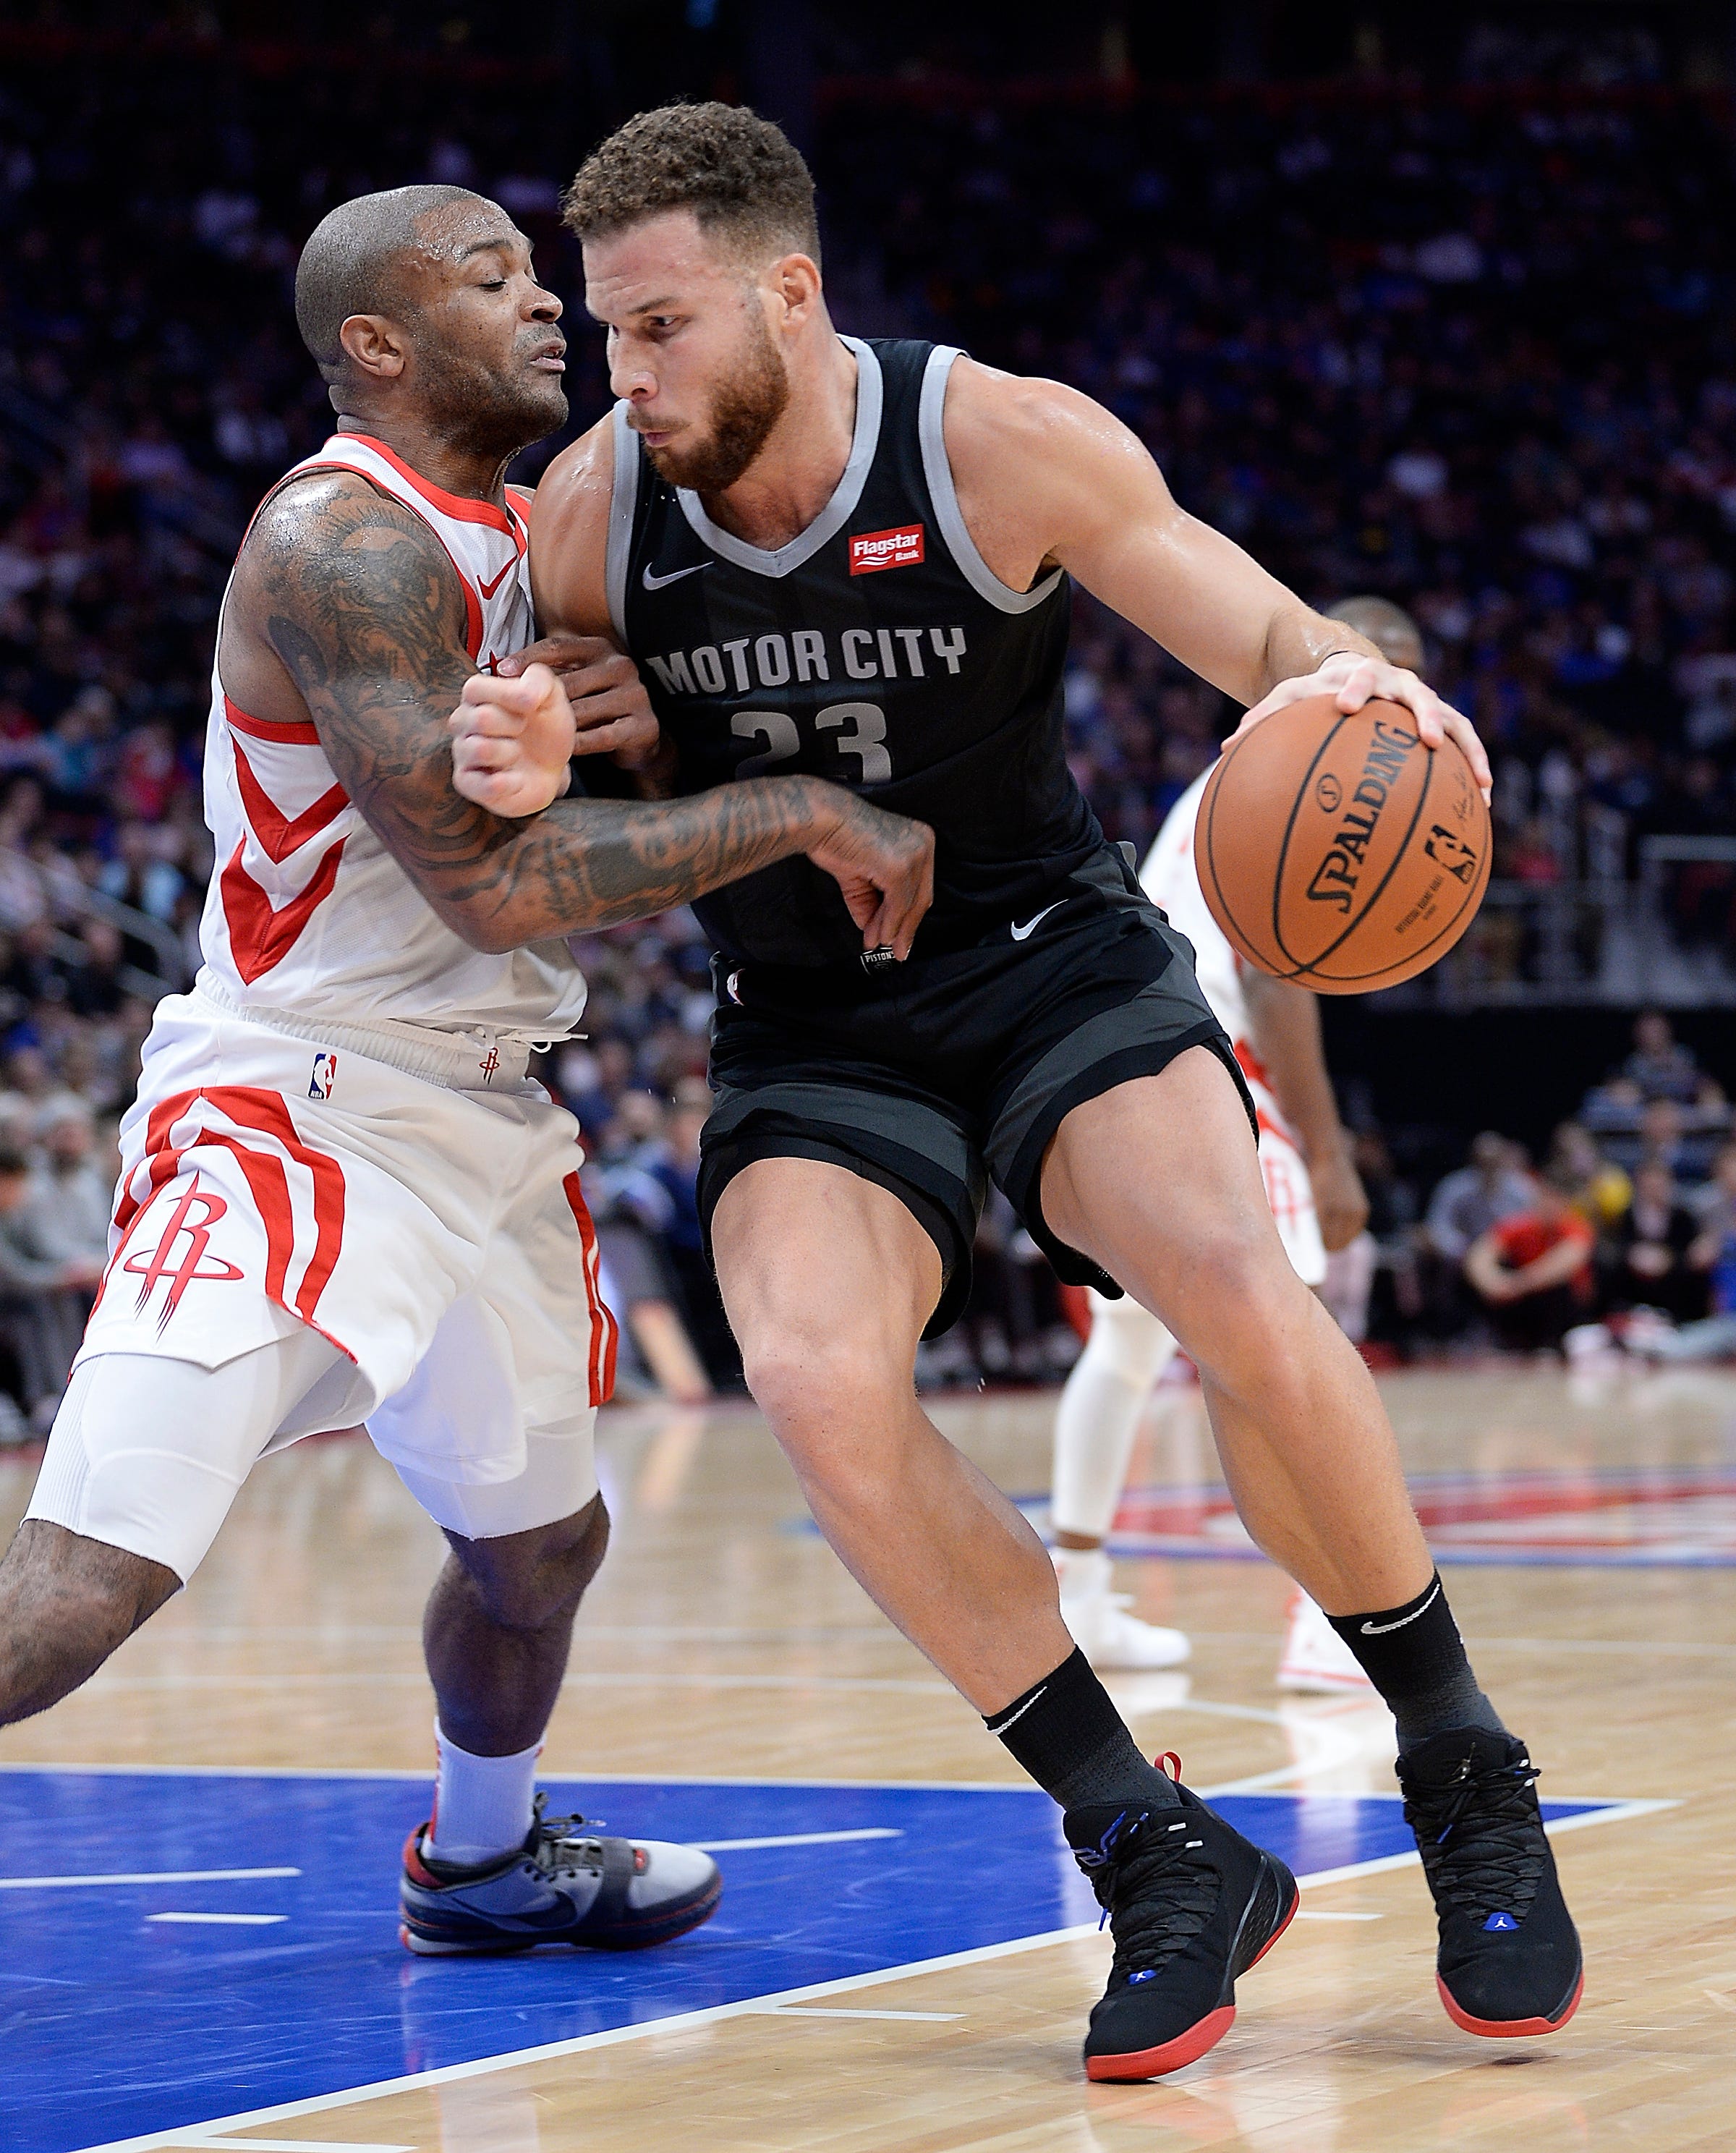 Pistons' Blake Griffin drives around Rockets' P.J. Tucker in the second quarter.